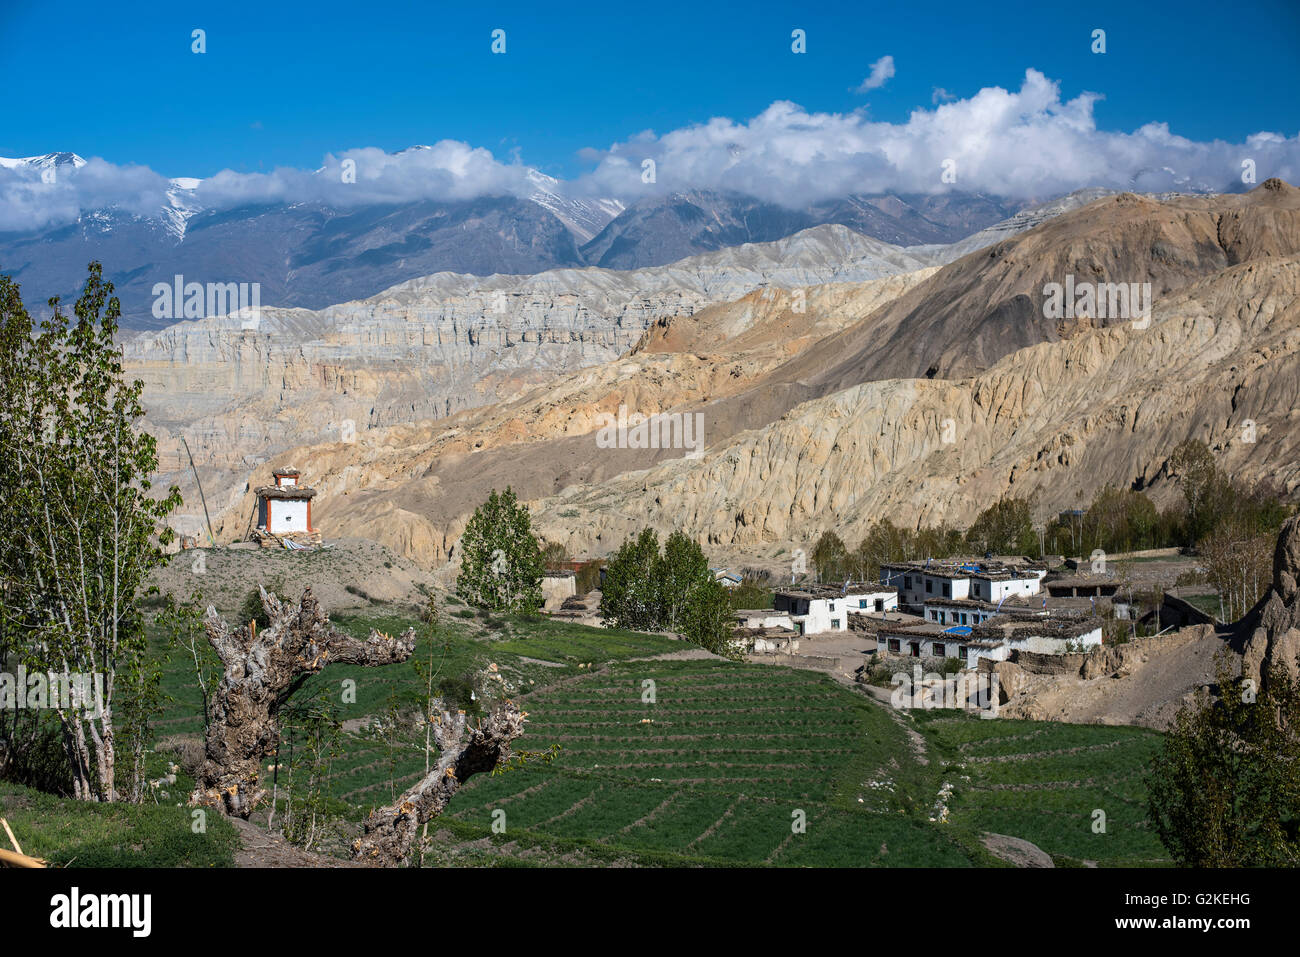 Mountains, eroded landscape with a small village, Stupa and green fields, Yara, Kingdom of Mustang, Upper Mustang, Himalaya Stock Photo